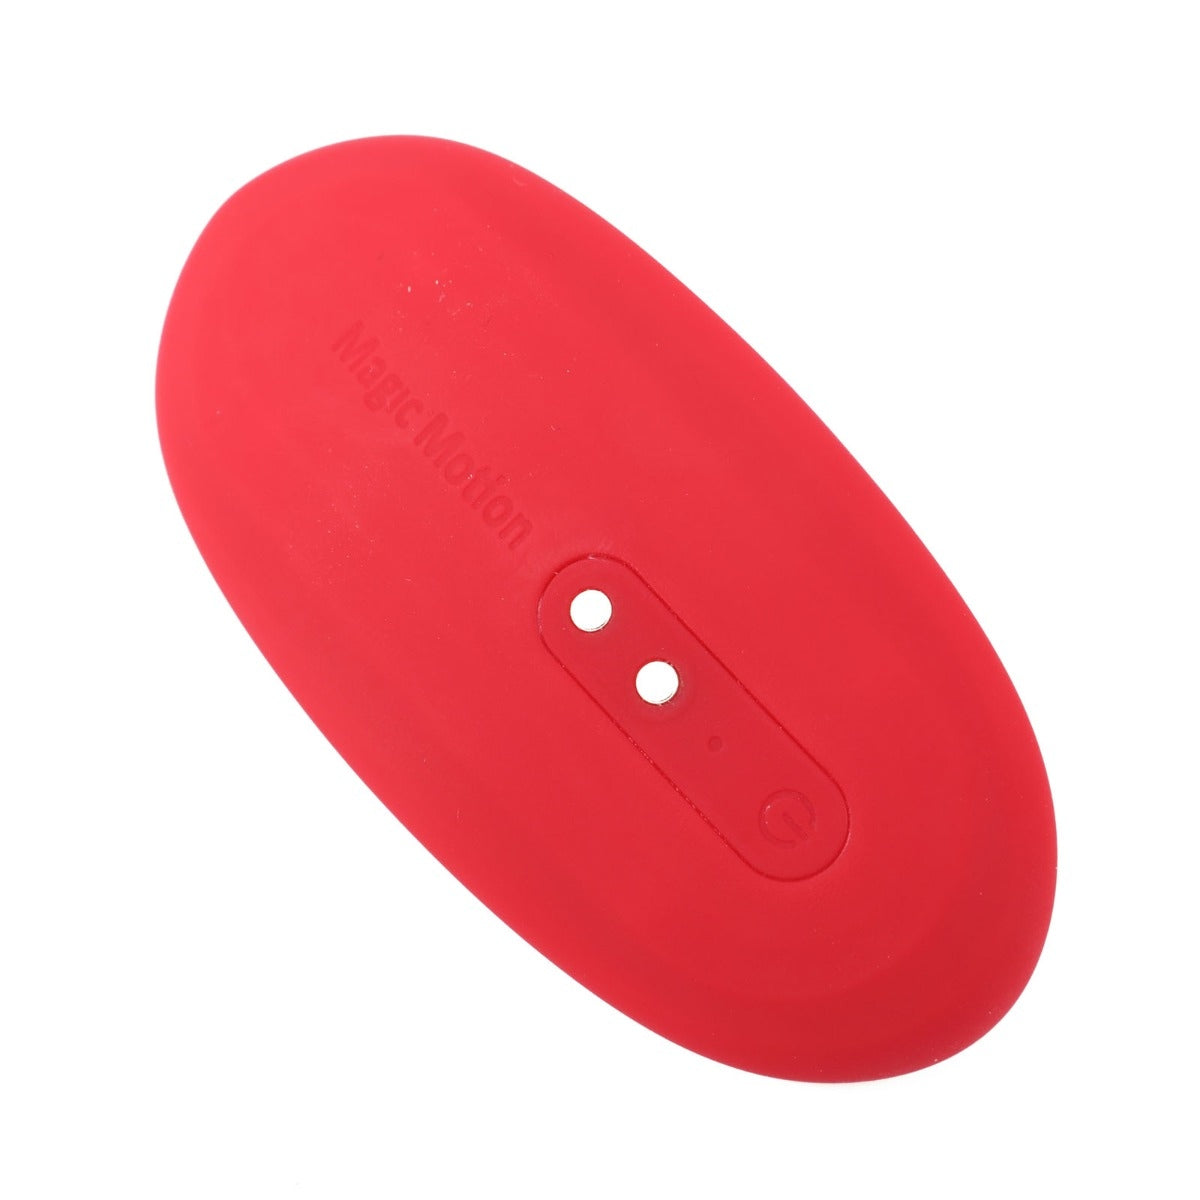 Magic Motion Nyx Smart Panties Vibrator With App Control Red